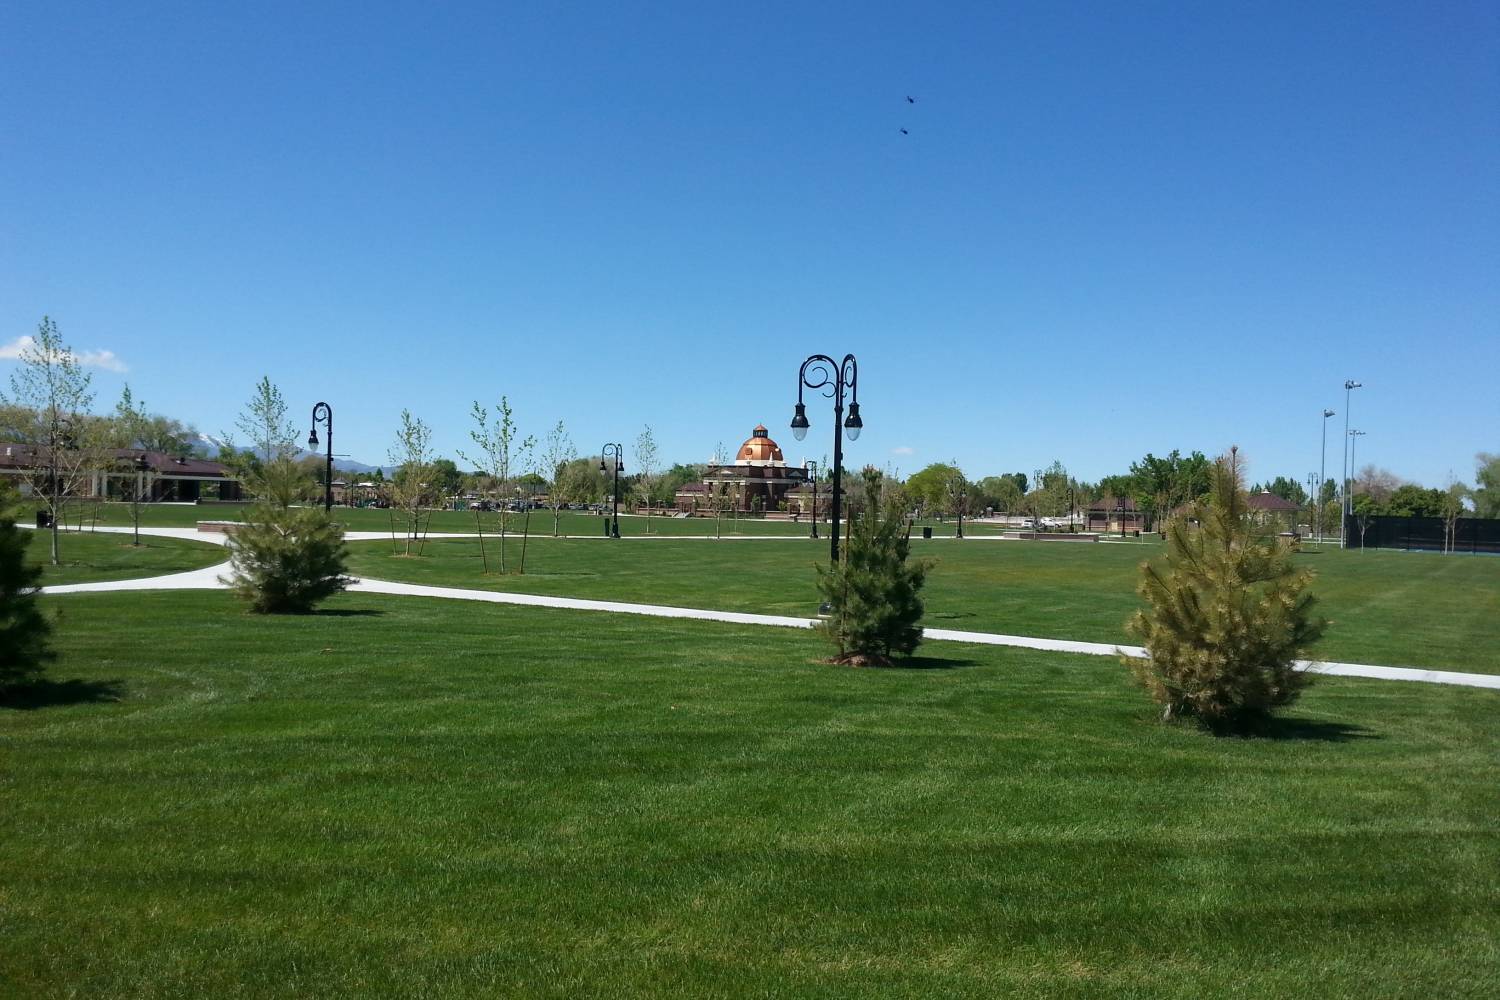 View from the park of Riverton